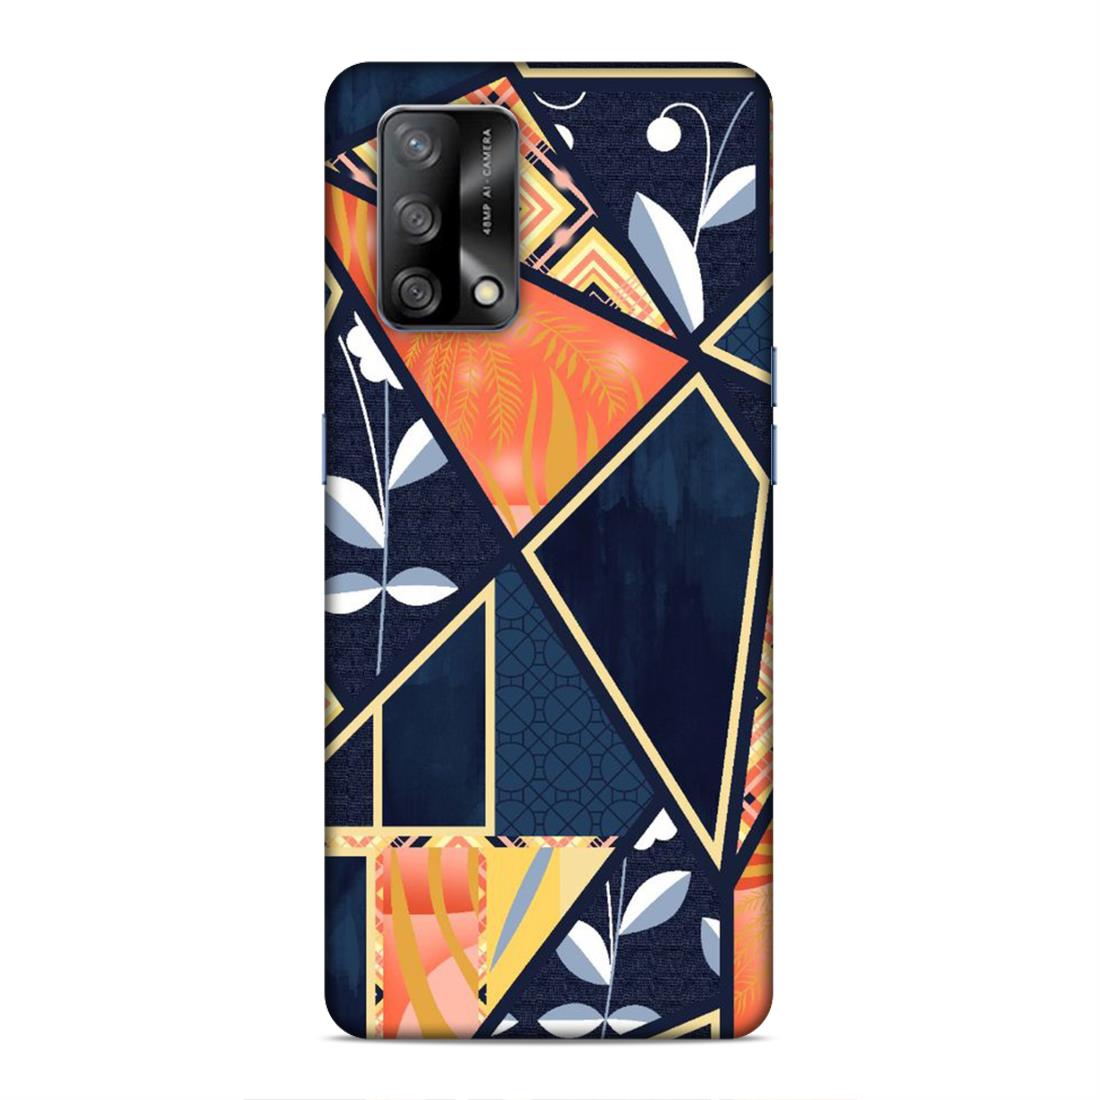 Floral Textile Pattern Hard Back Case For Oppo F19 / F19s